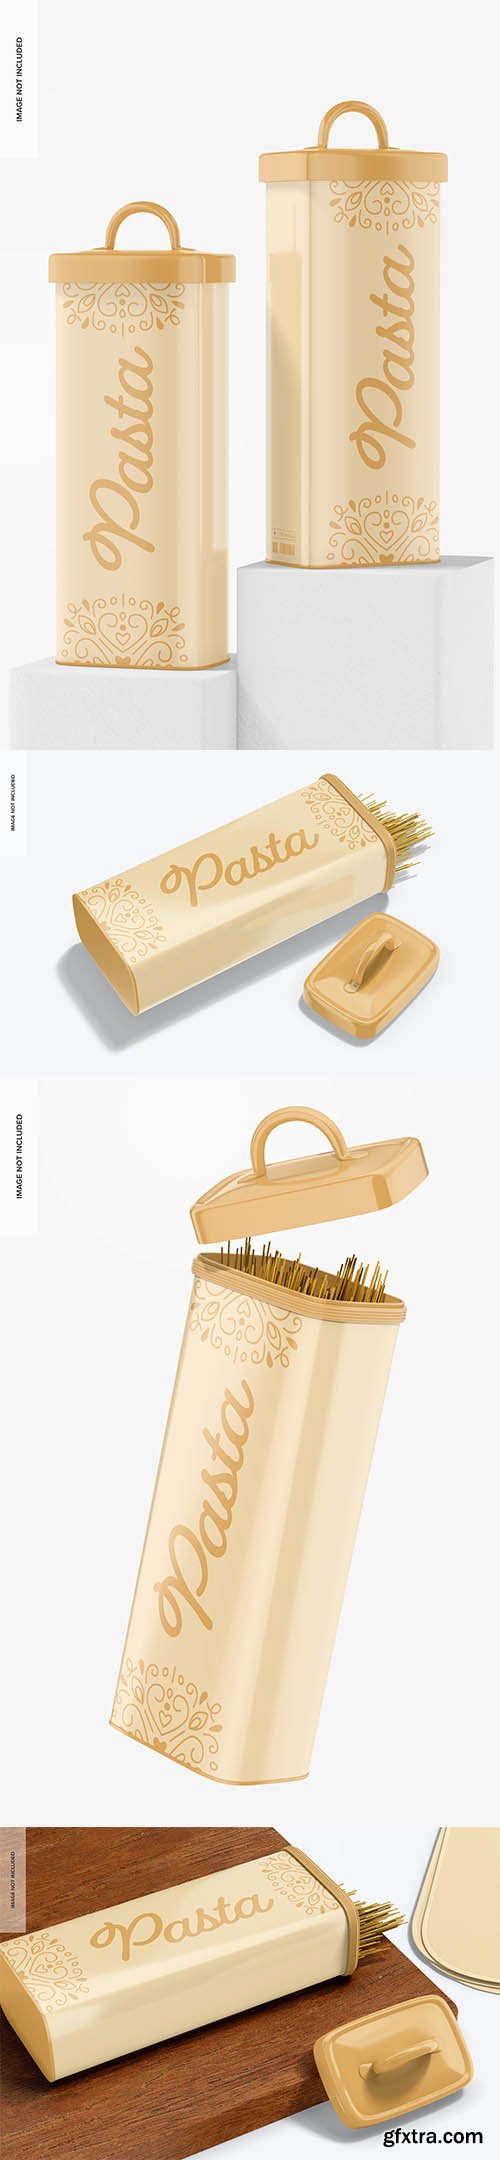 Tall pasta storage container mockup